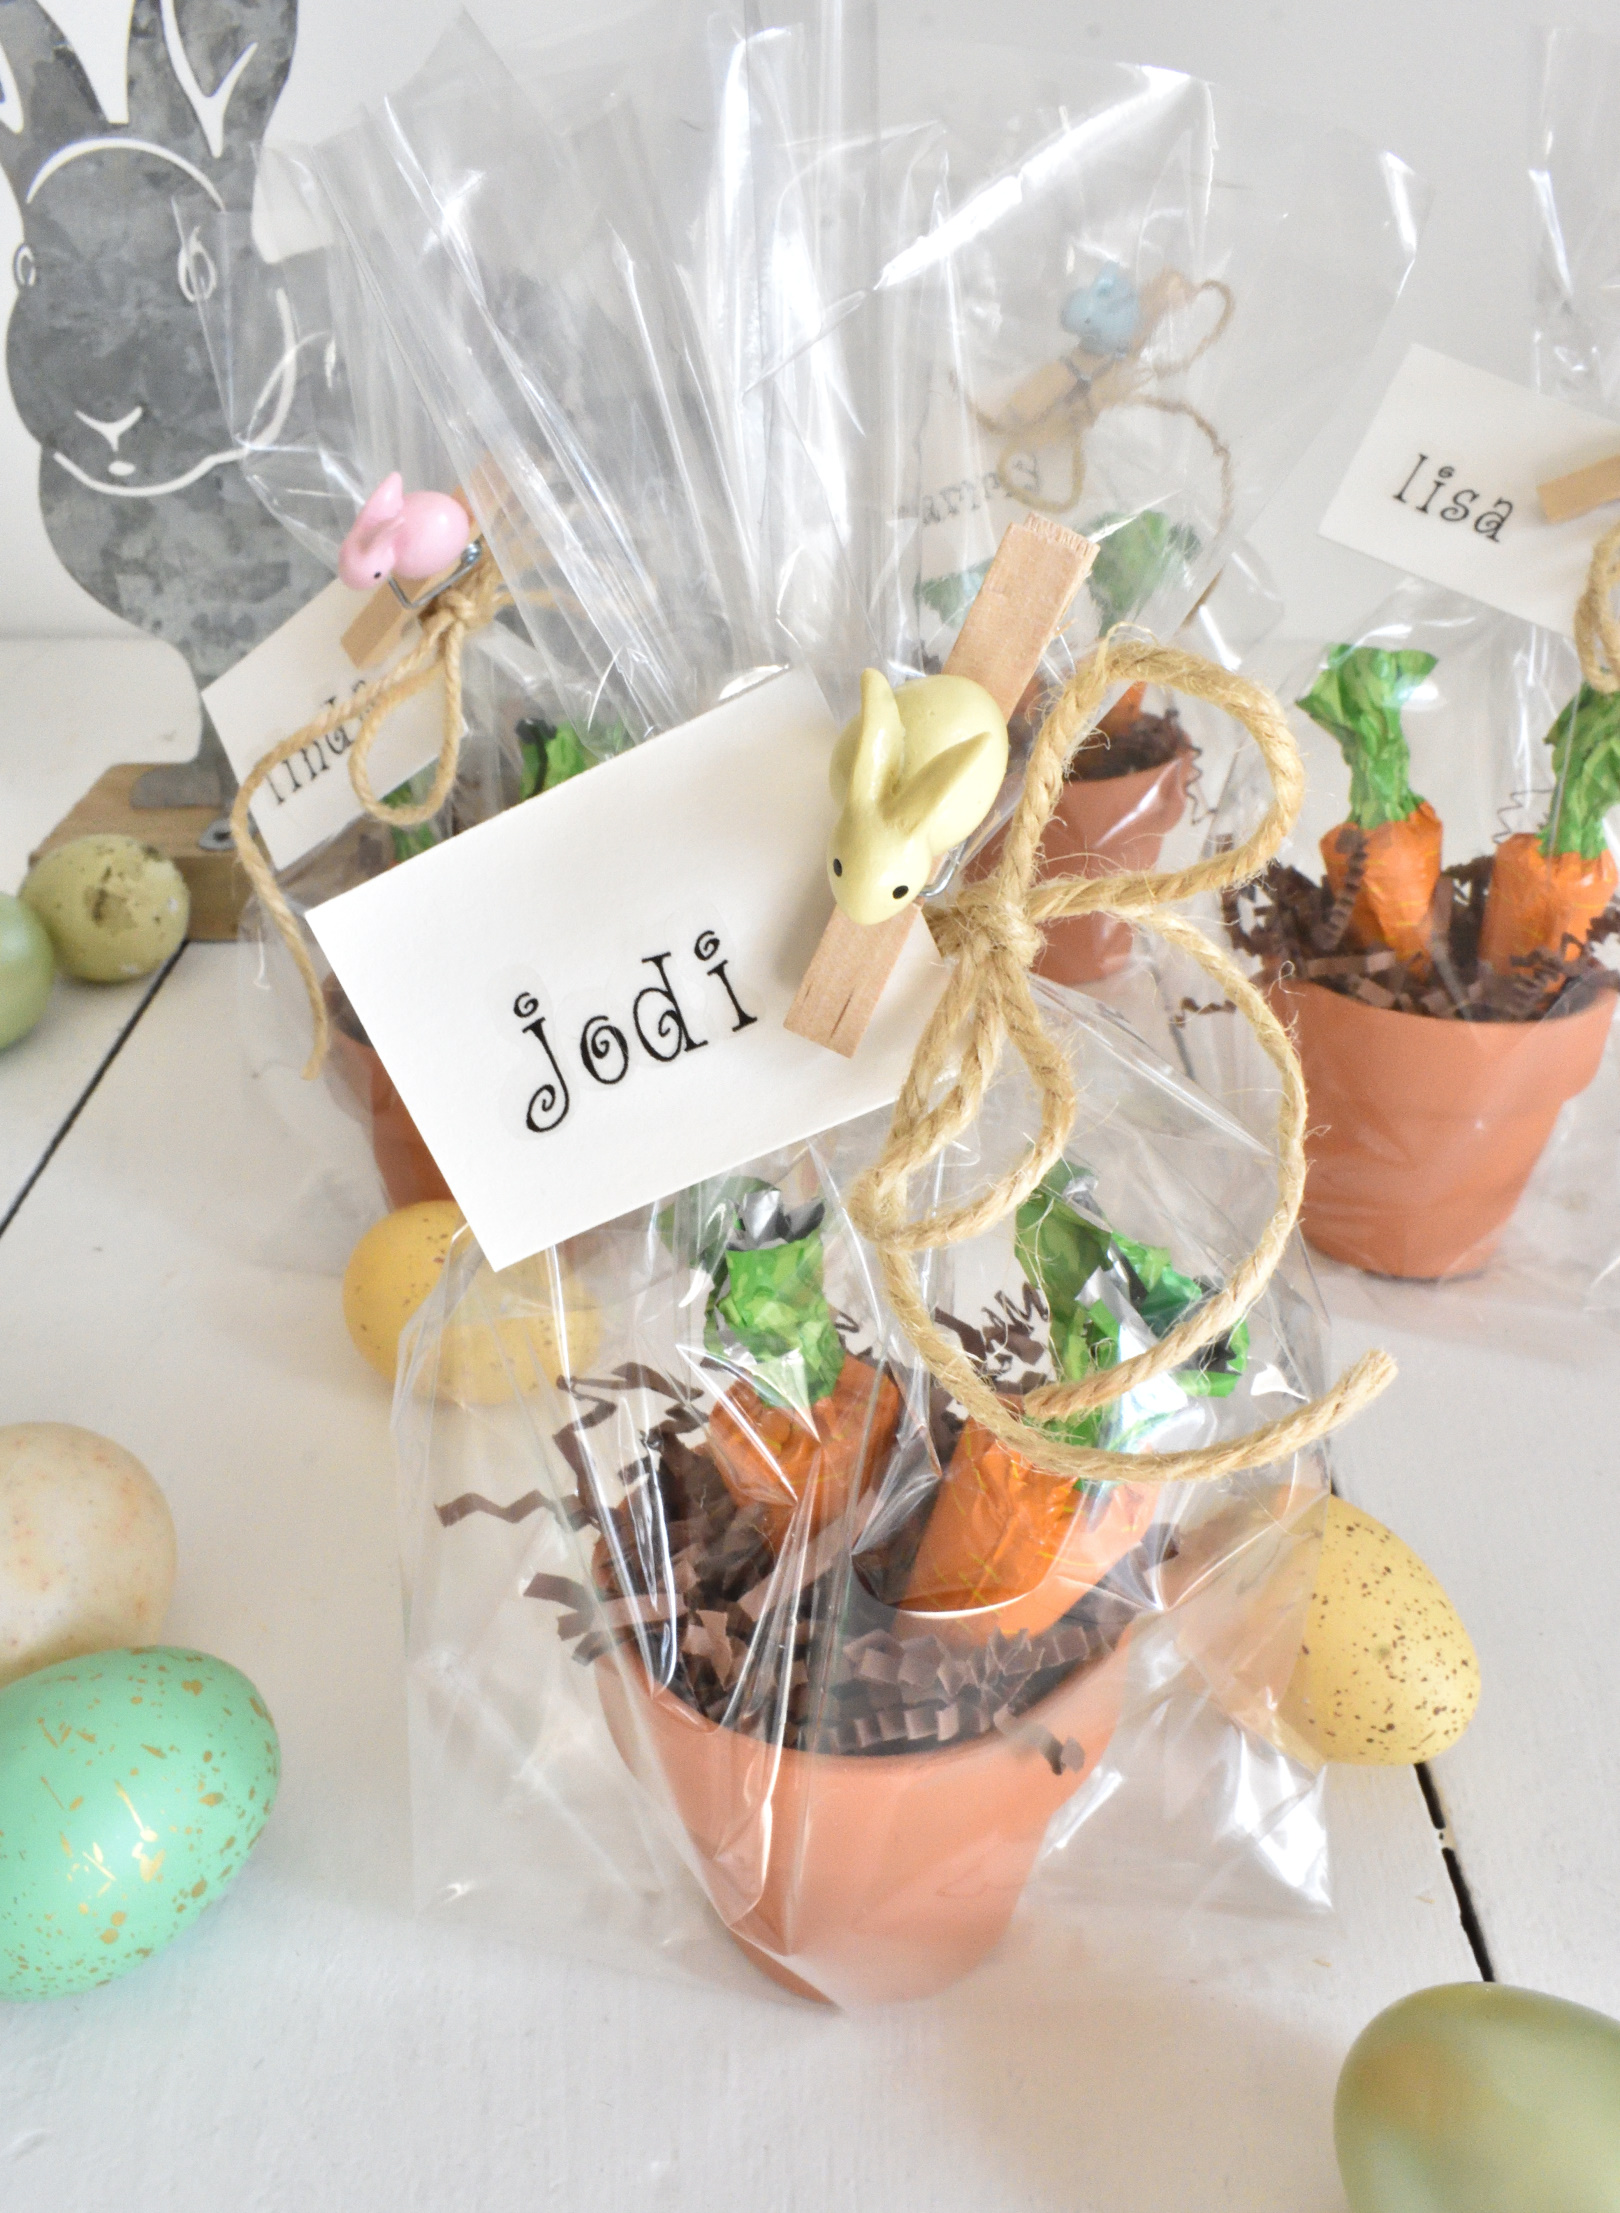 DIY Easter gifts